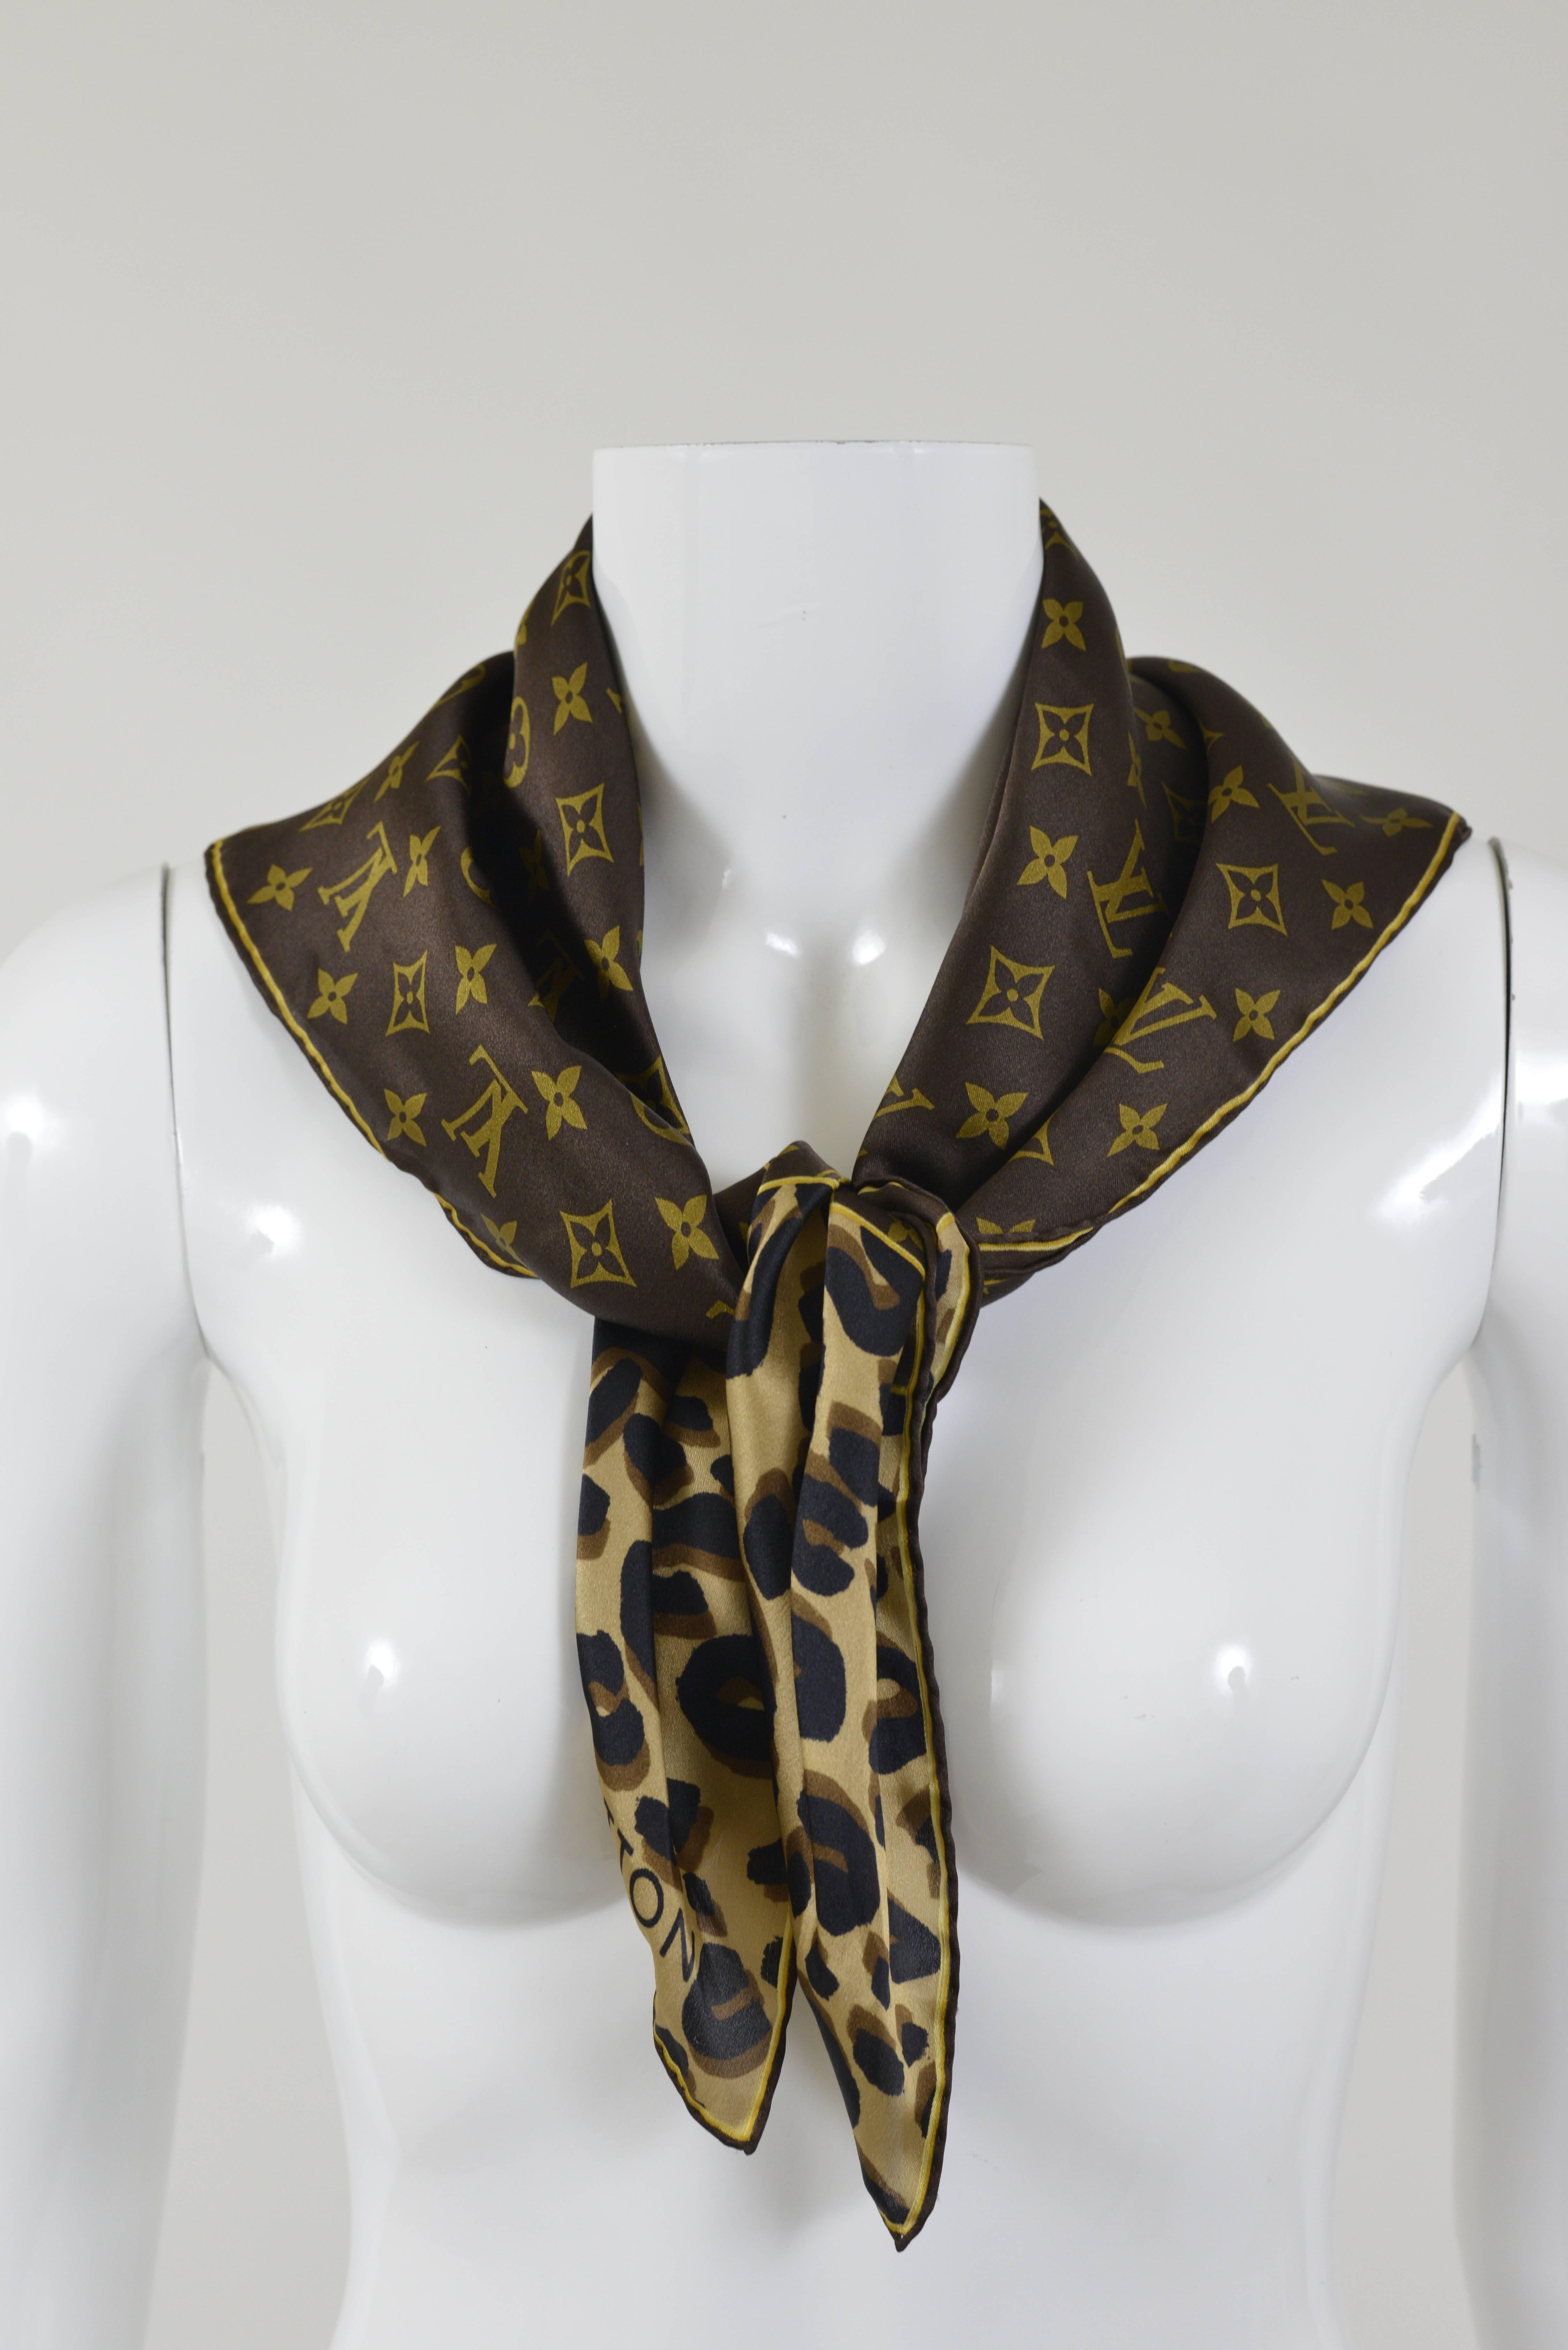 This authentic Louis Vuitton Scarf is 100% silk and has typical background with LV monogram motif. 
Made in Italy

Excellent condition 

MEASUREMENTS:
27 x 27 inches